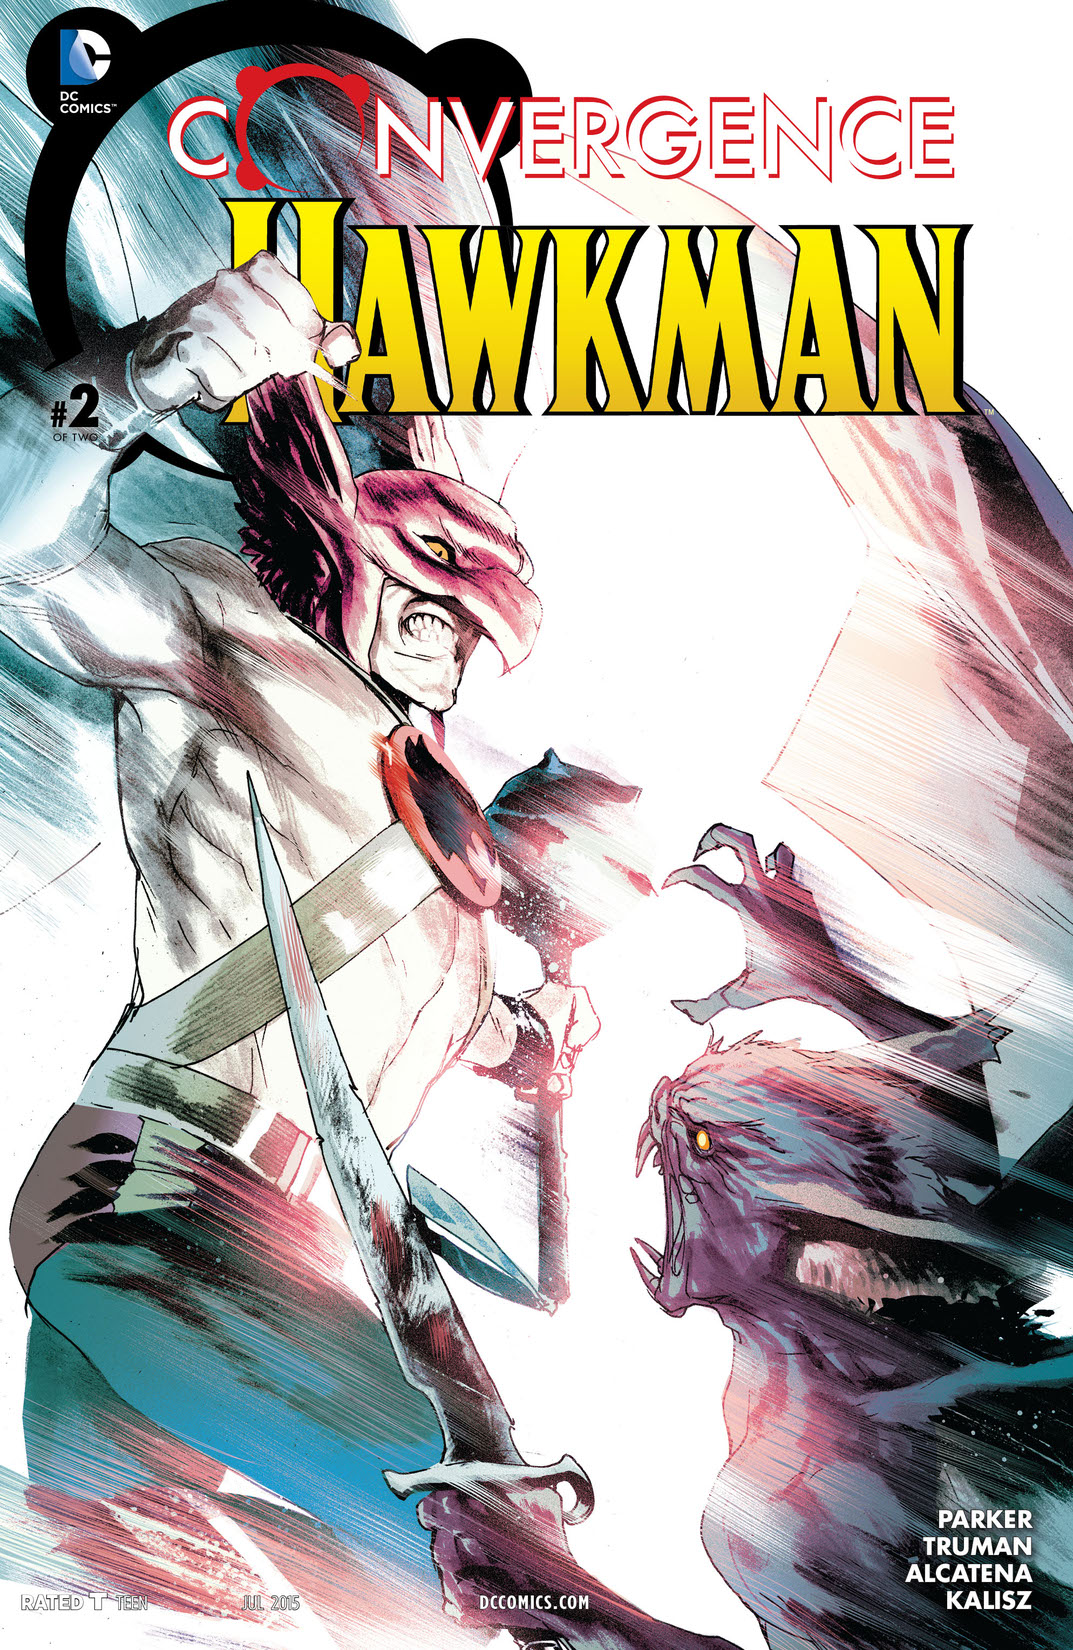 Convergence: Hawkman #2 preview images